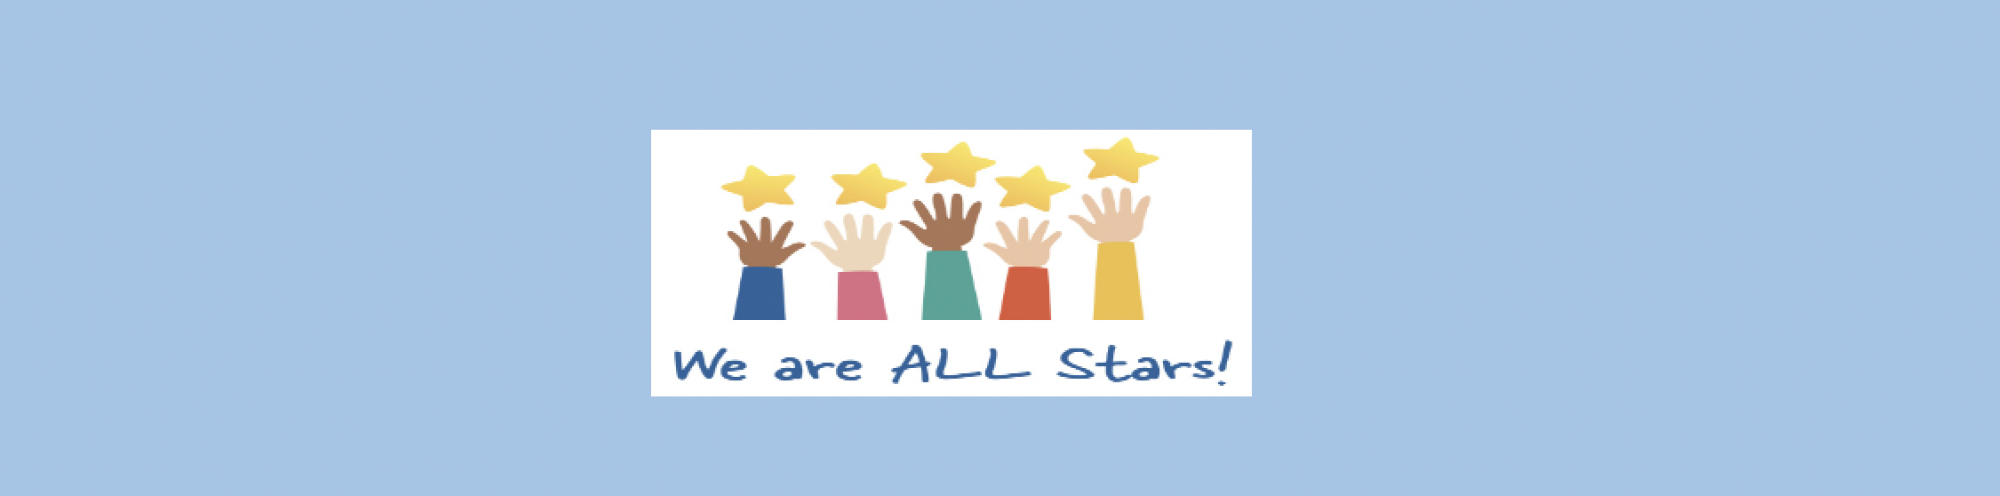 xhands and arms with different skin tones reaching for stars text: We are ALL Stars